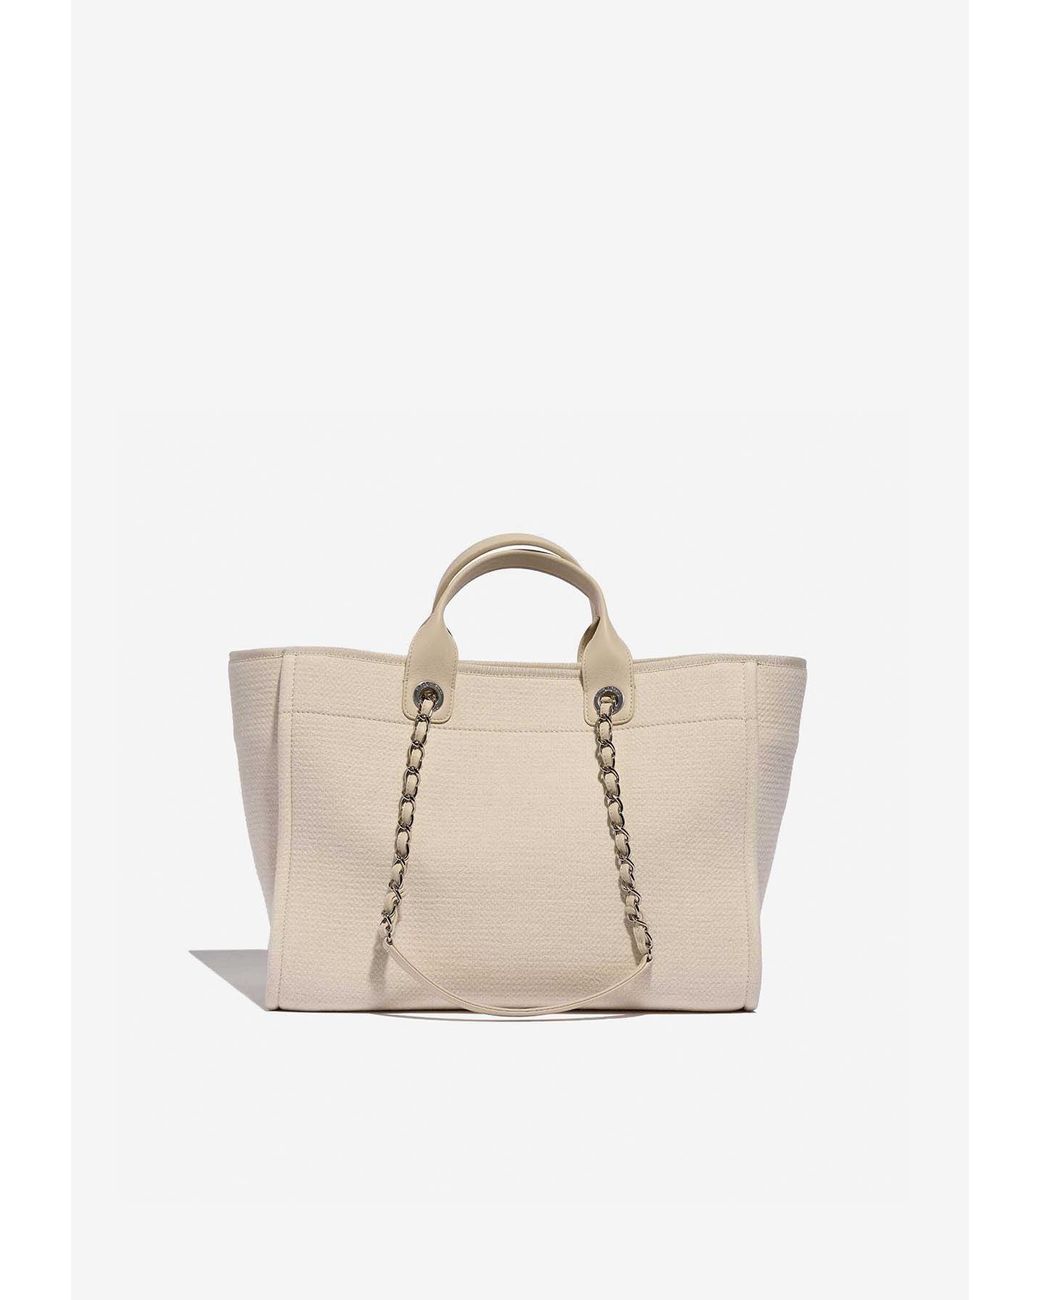 Chanel Medium Deauville Shopping Bag In Beige And White Canvas in